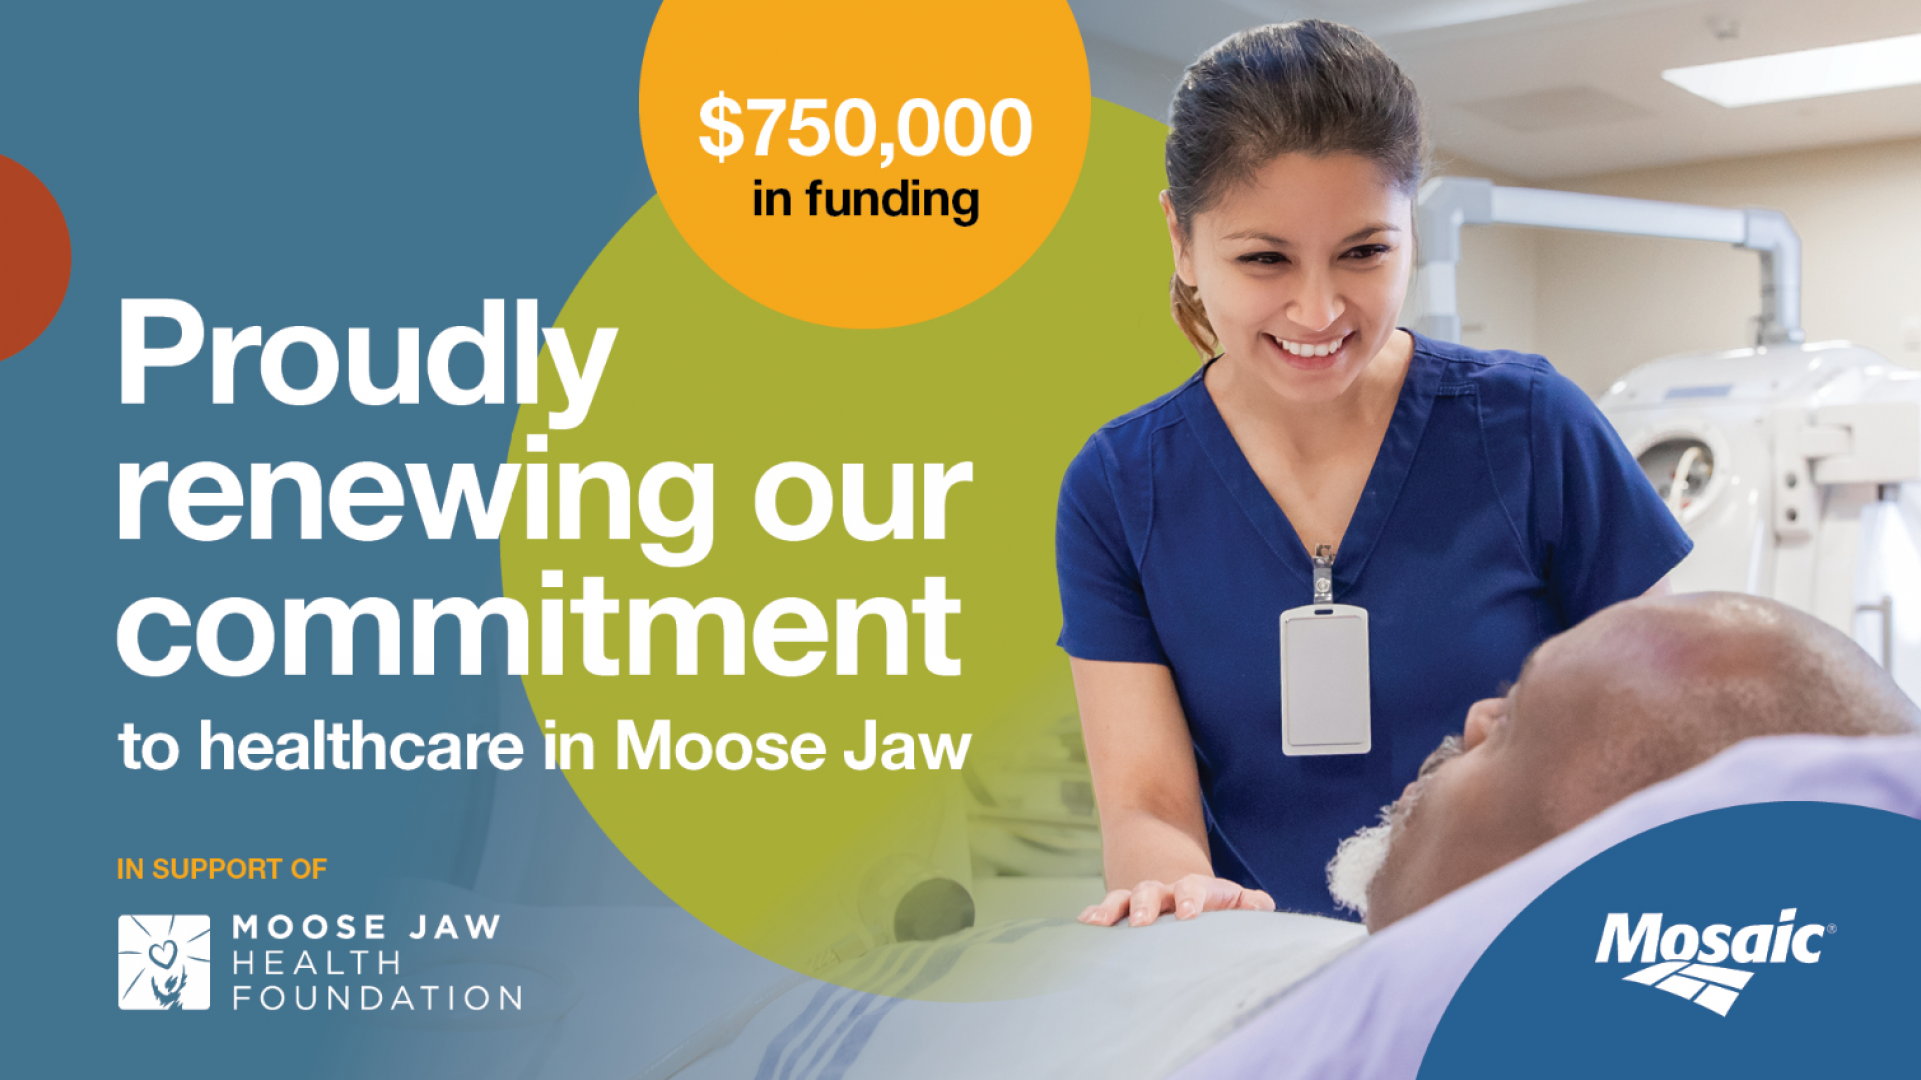 Mosaic Extends Commitment to Moose Jaw Health Foundation